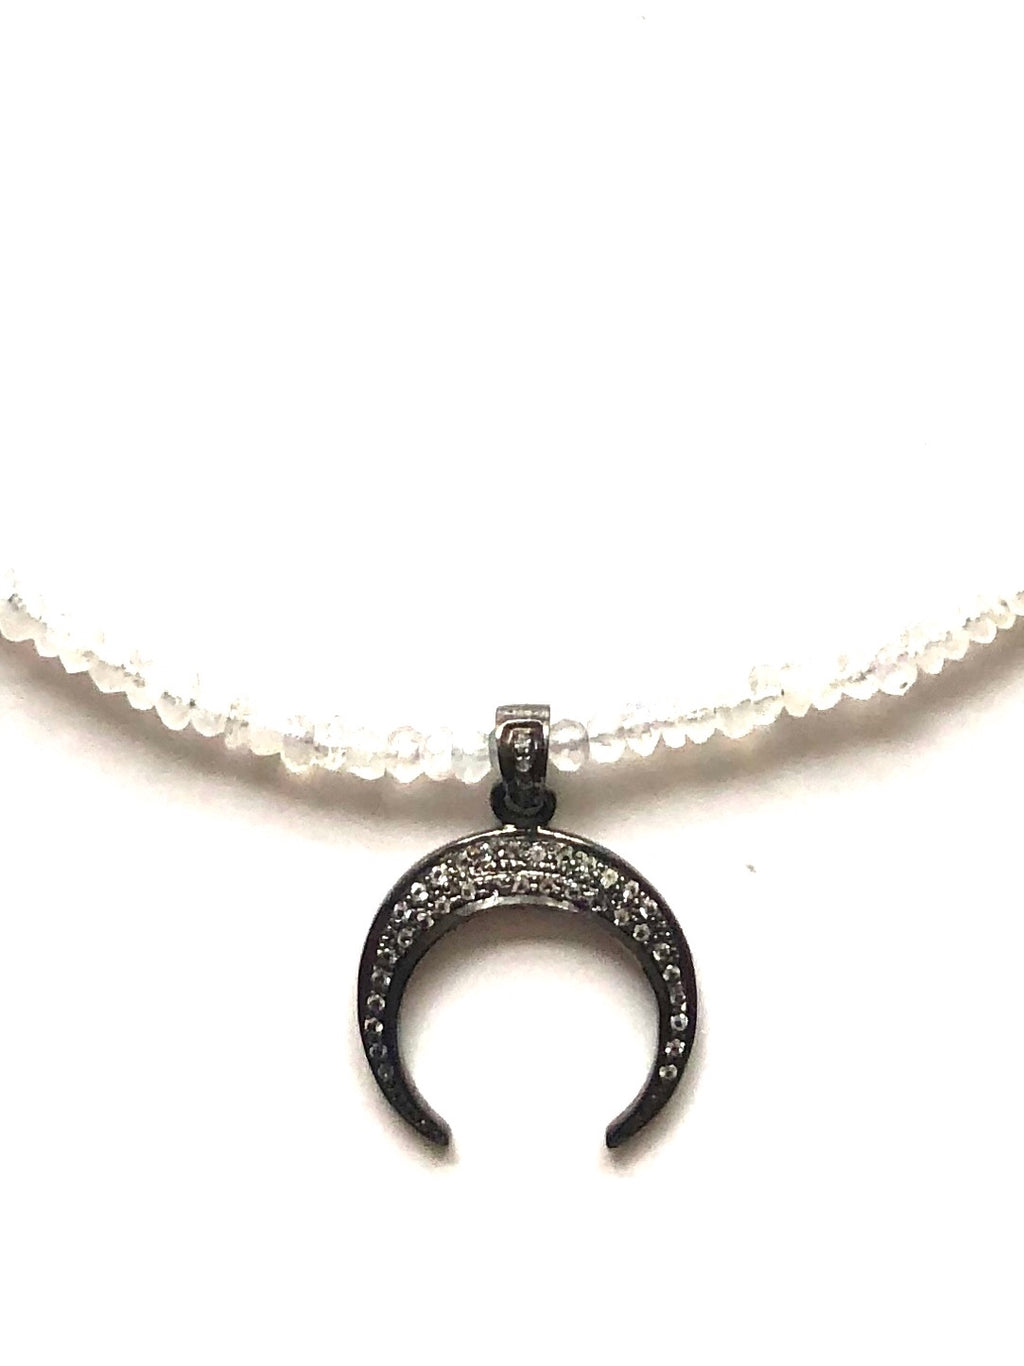 Moonstone and Pave Crescent Moon Necklace